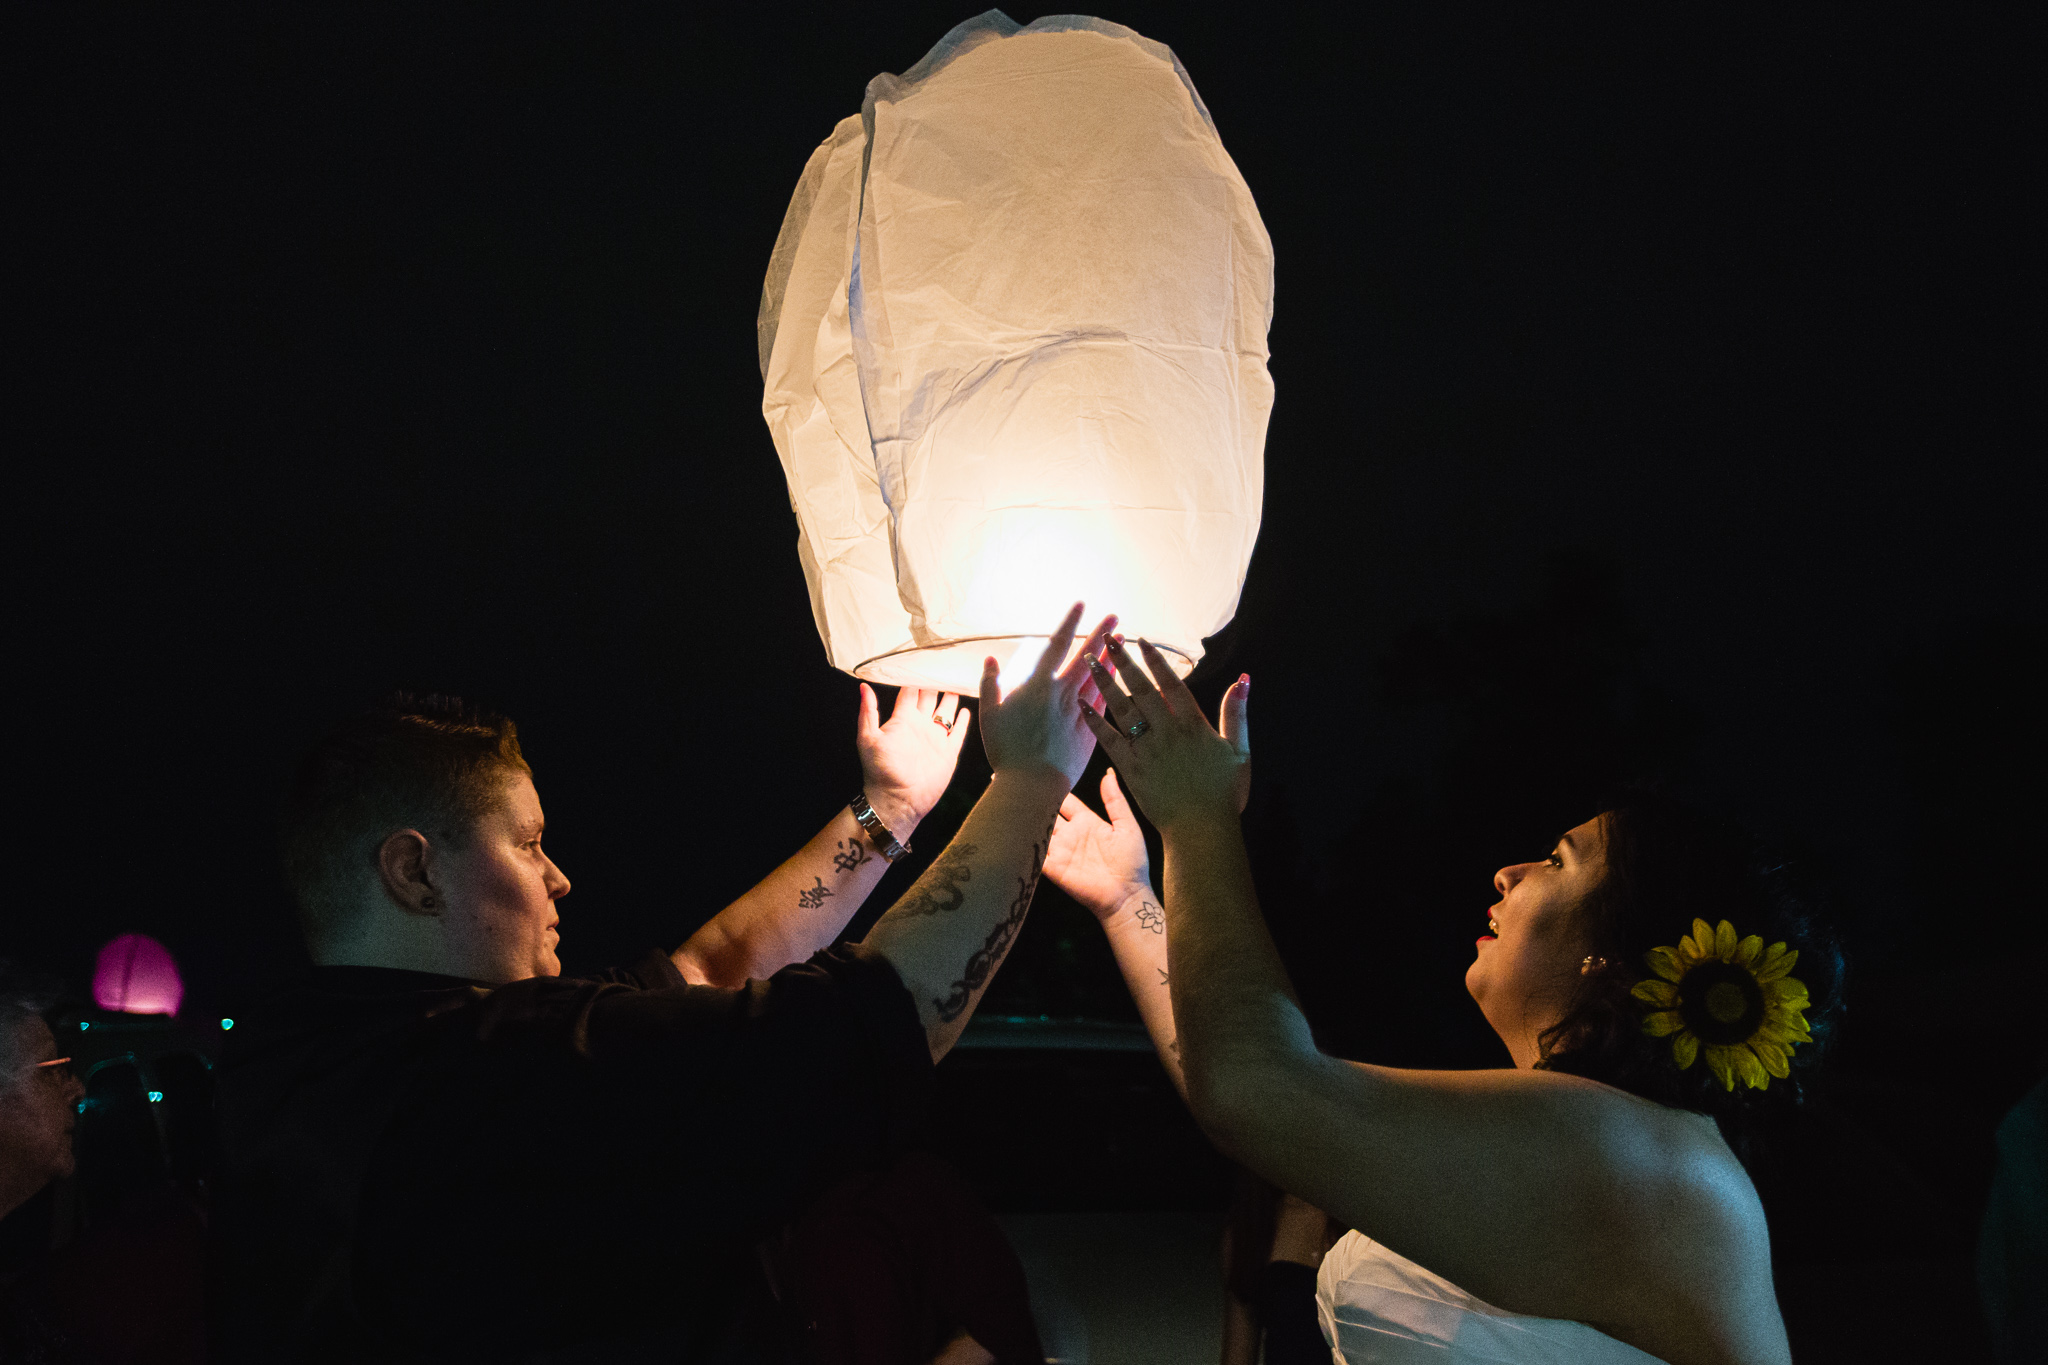 Brides light paper lanterns with guests as part of their reception to remember lost loved ones.